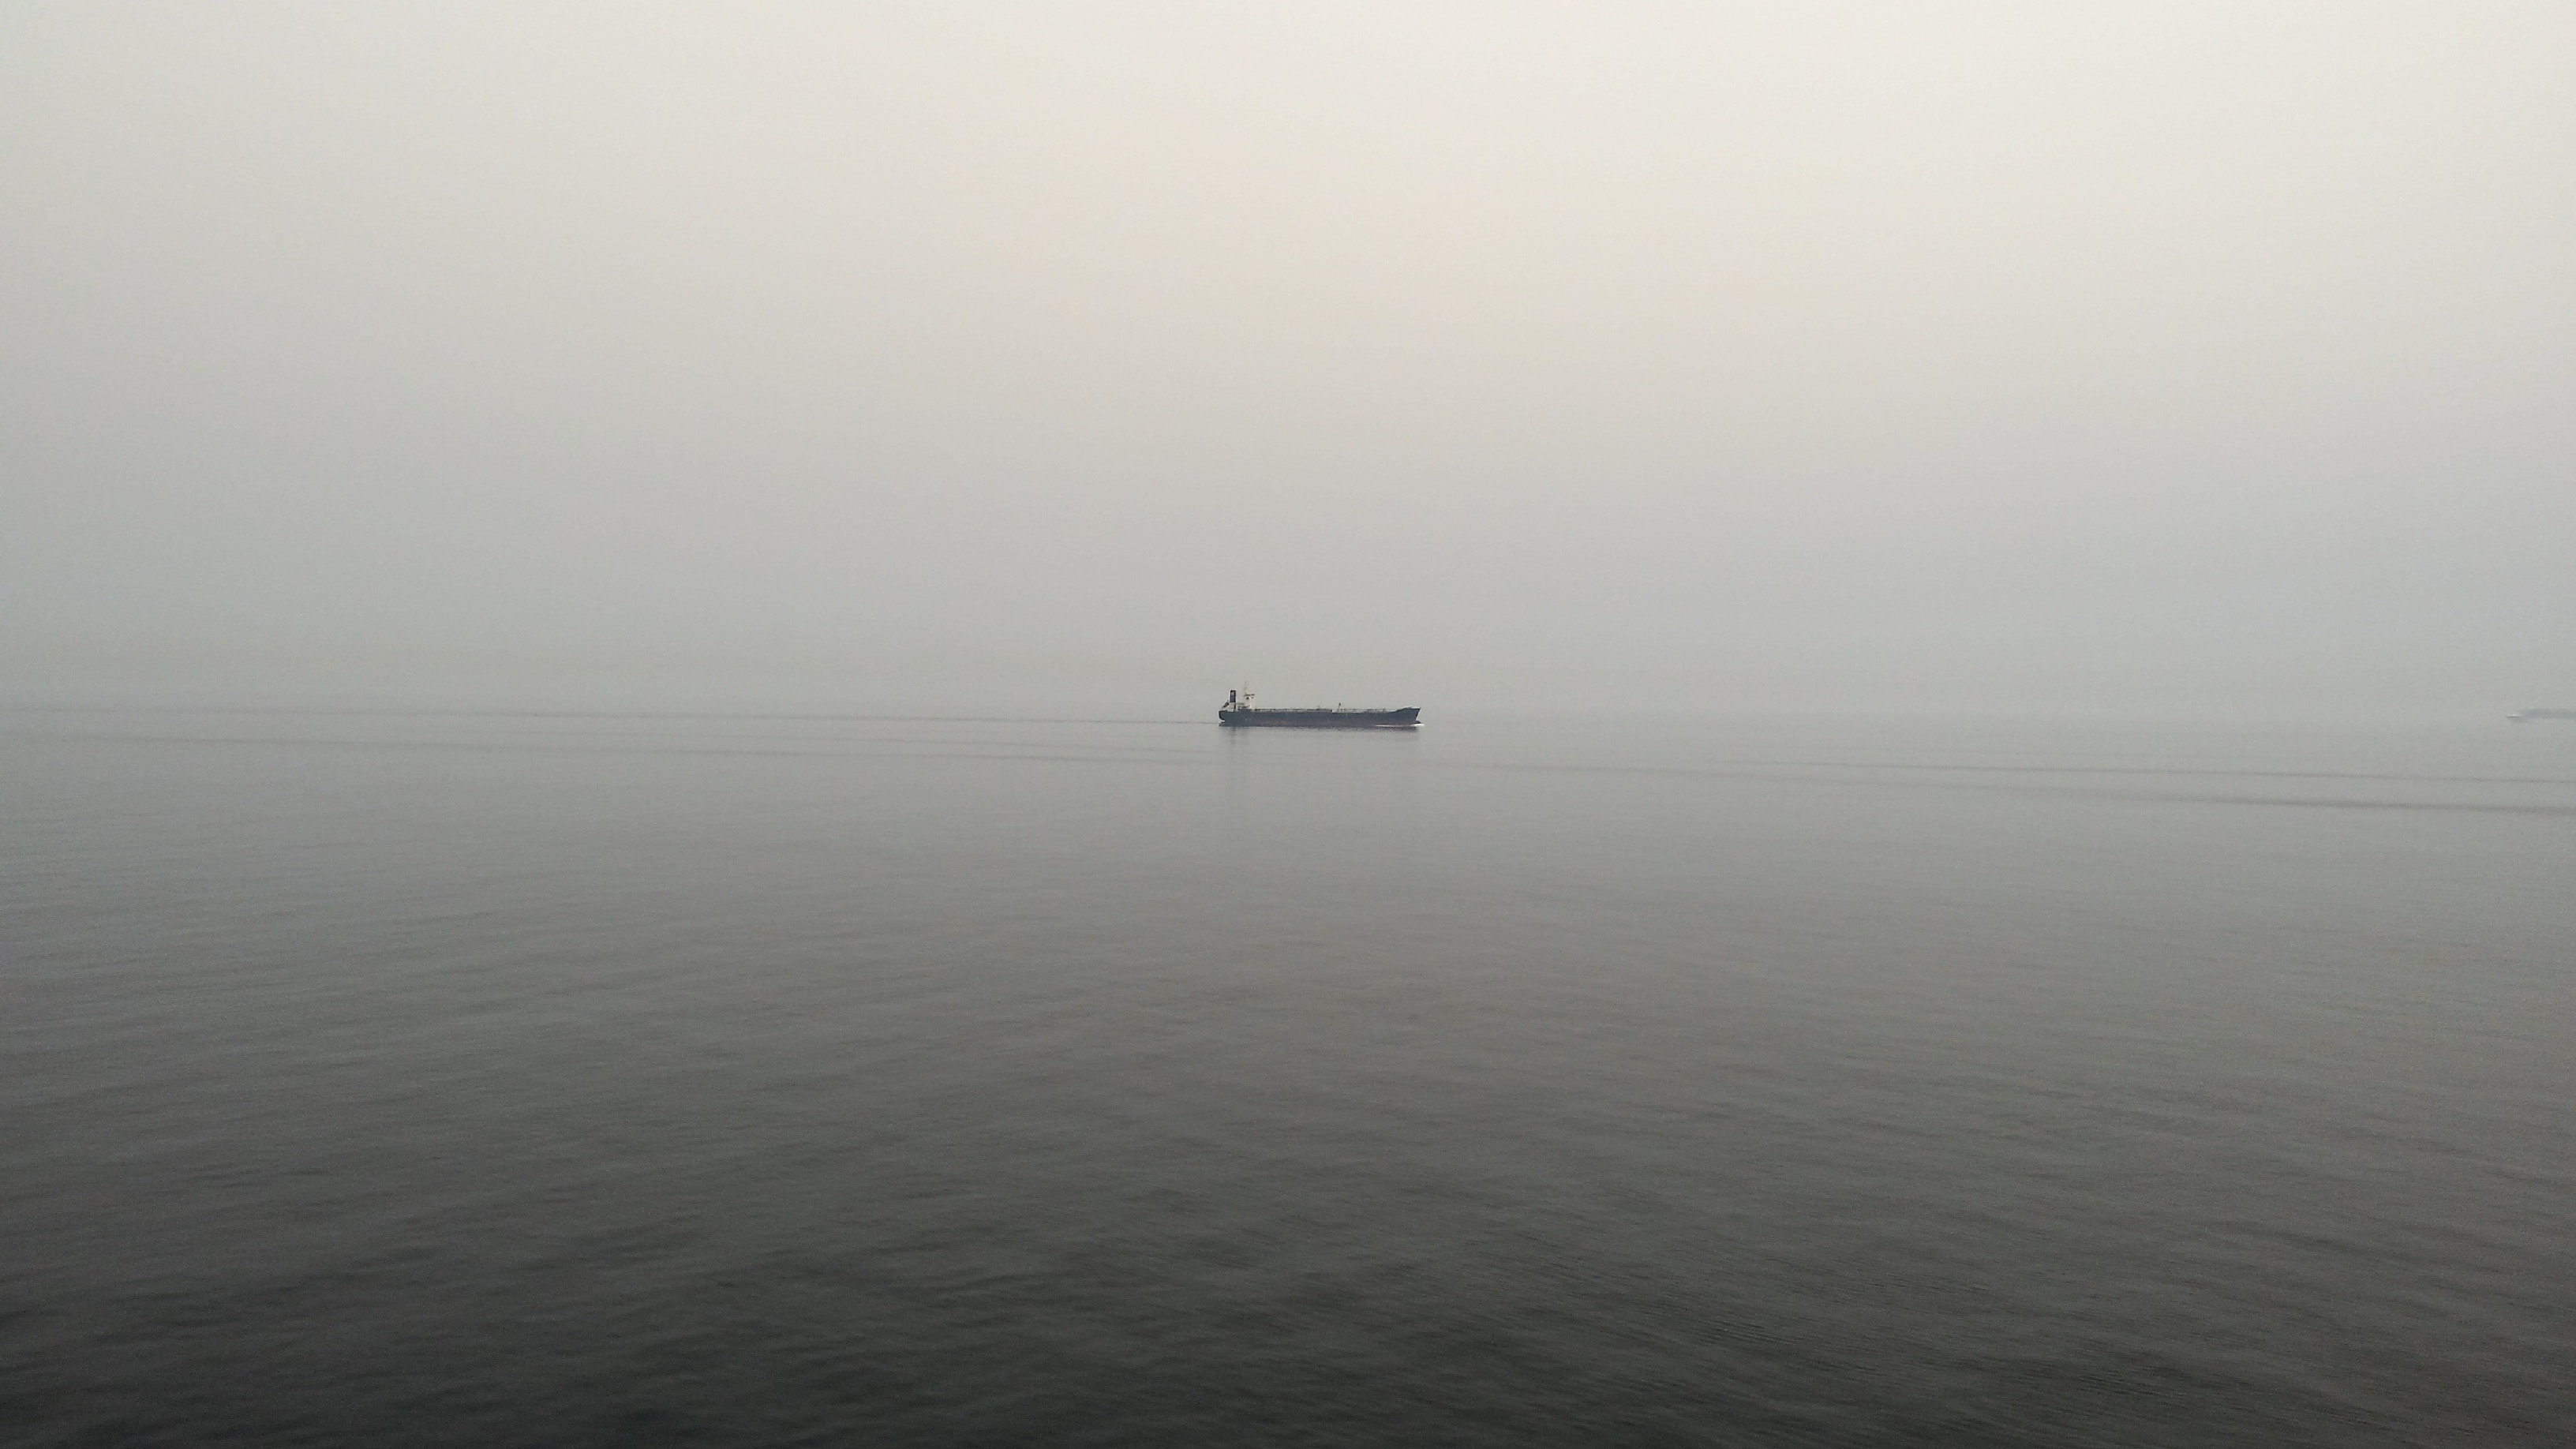 General 3264x1836 photography sea boat alone mist